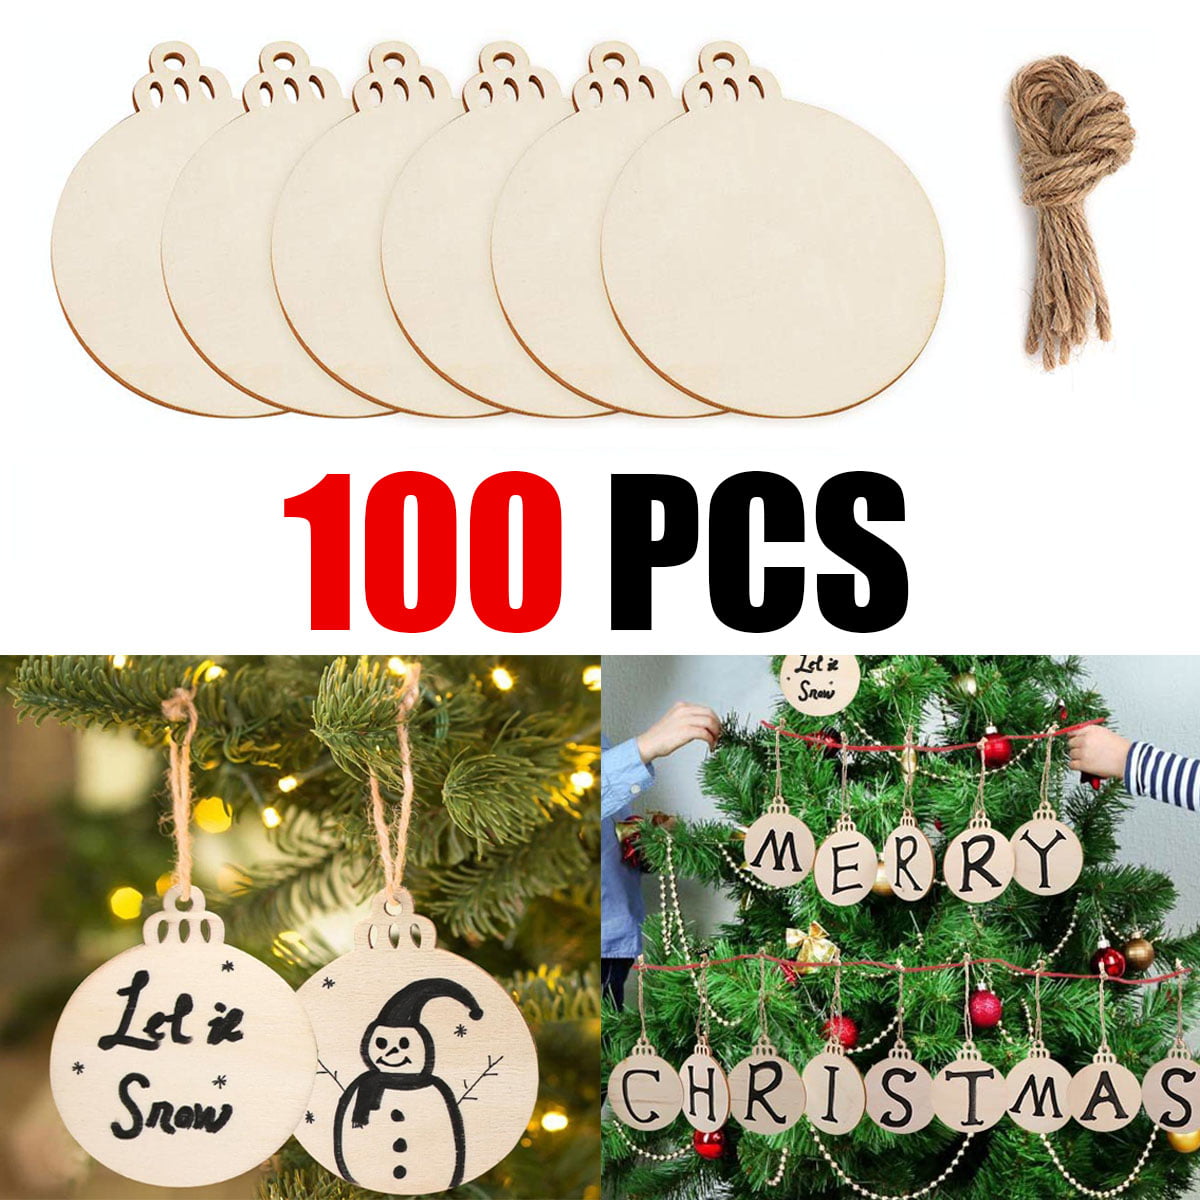 Stars 50 Pcs Unfinished Paintable Blank Wooden Christmas Festival Decoration Ornaments 5 Designs-Christmas Tree Xmas Tree Hanging Wood Slices for Kids DIY Art Crafts Angel Round Snowman 